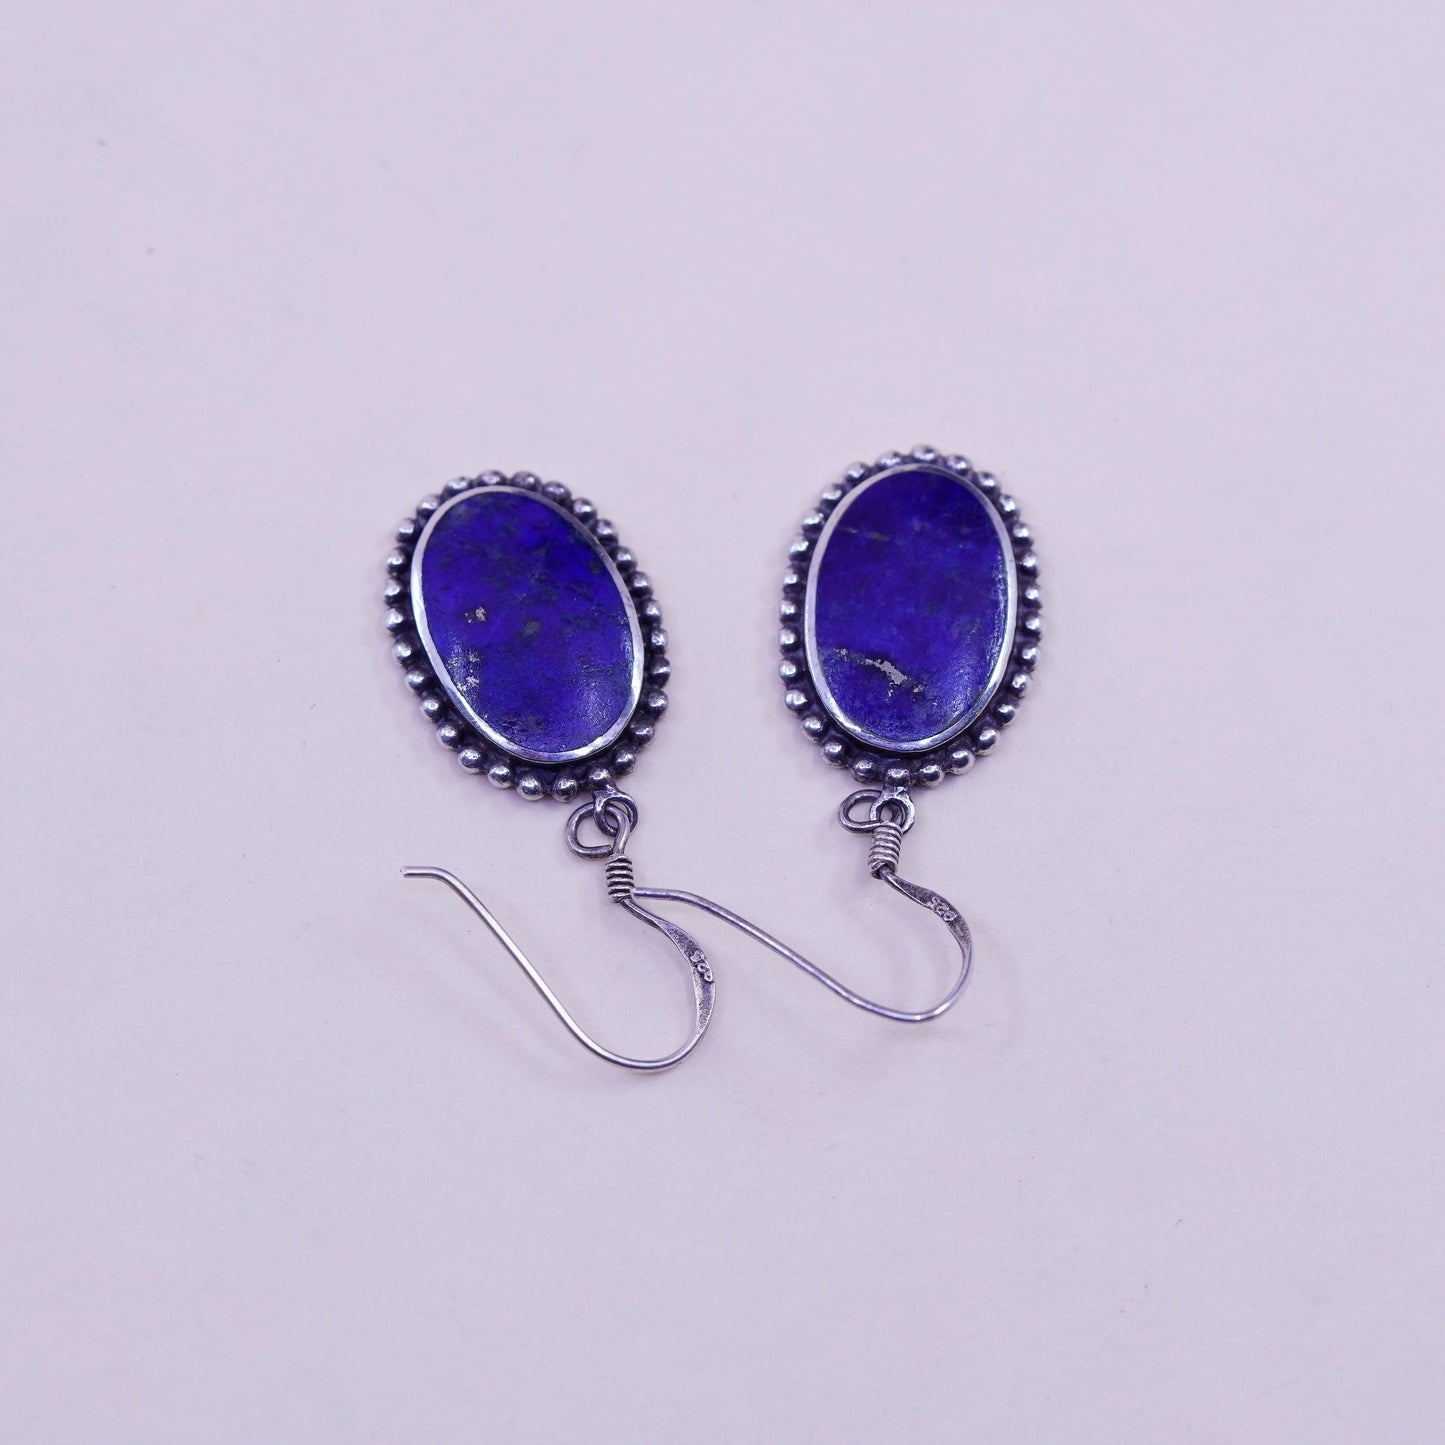 Vintage Sterling 925 Silver Handmade earrings with oval lapis lazuli and beads